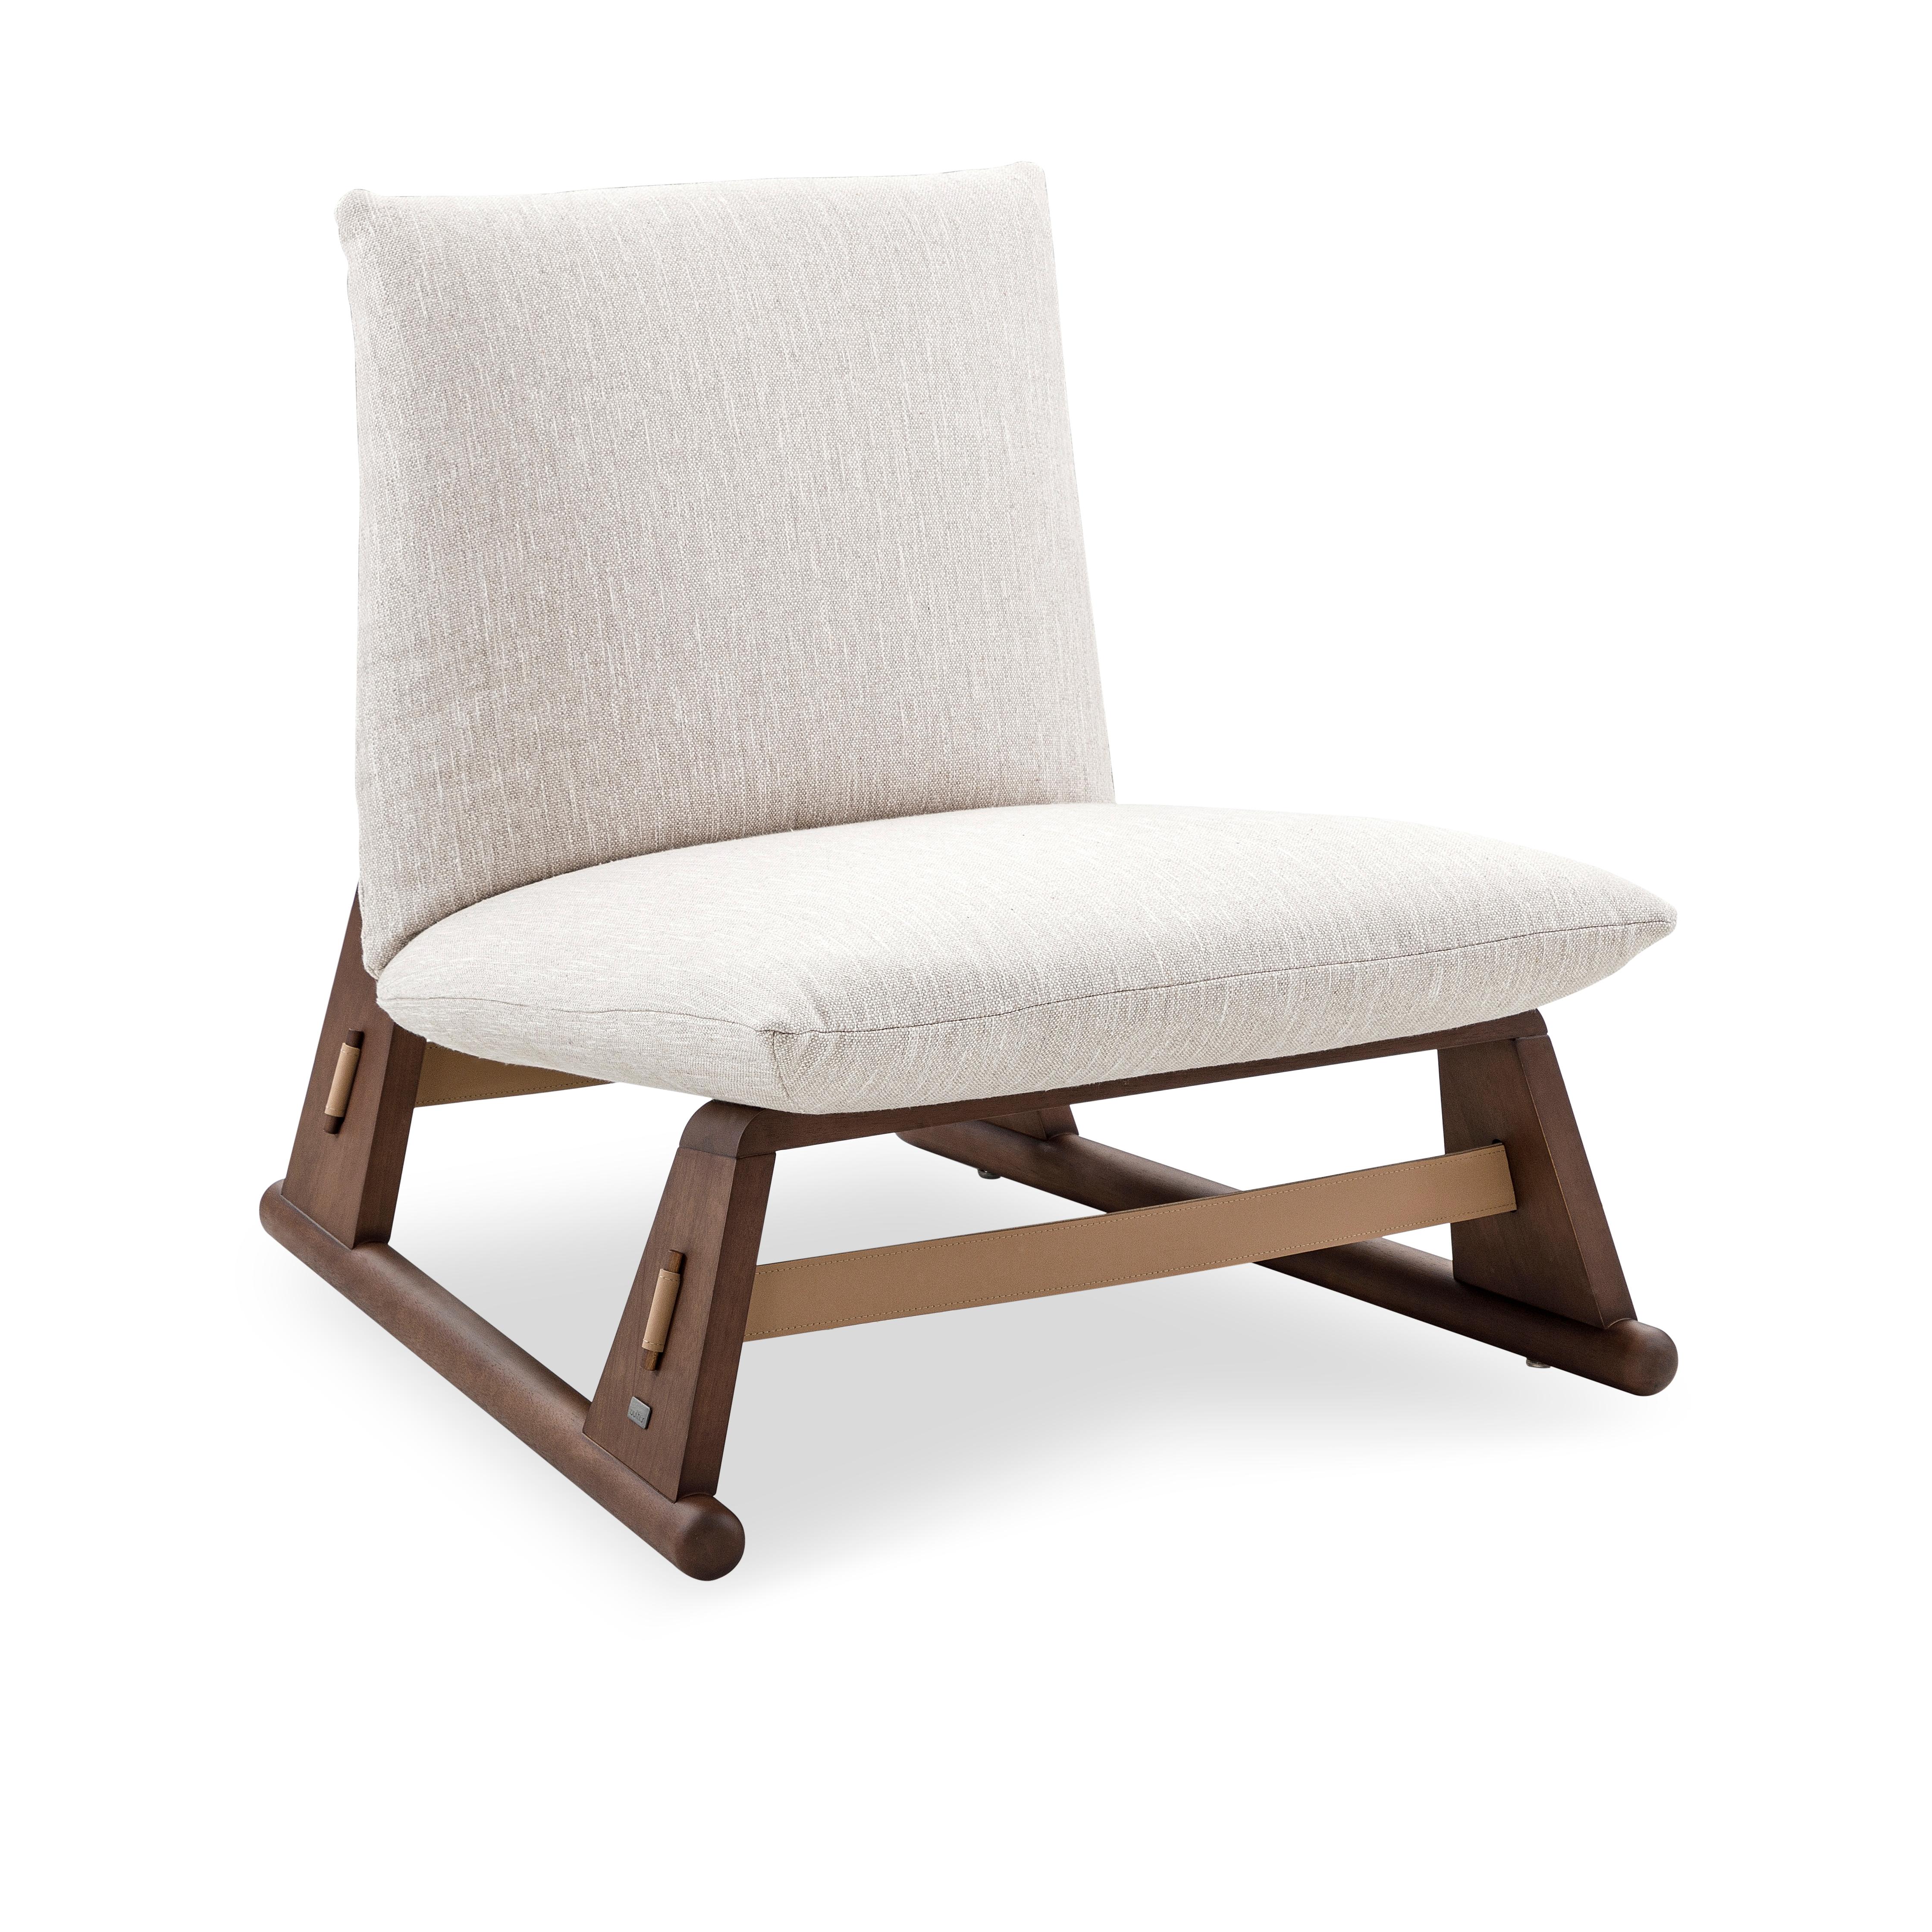 Upholstery Contemporary Maia Chair in Walnut Wood Finish Frame and Off-White Fabric For Sale